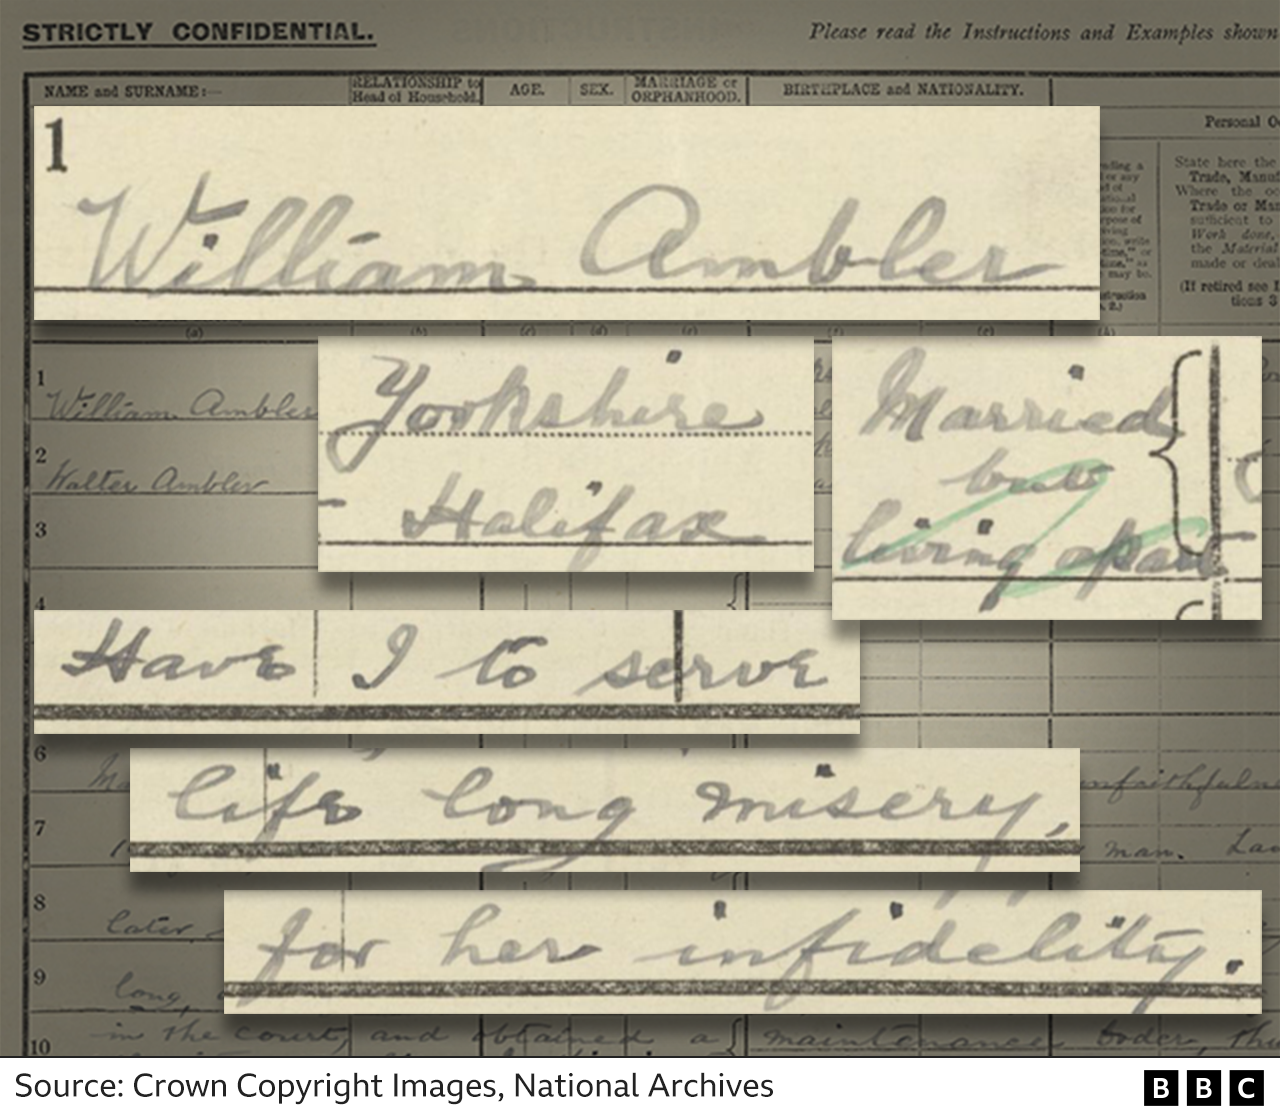 Extracts from William Ambler's 1921 Census form